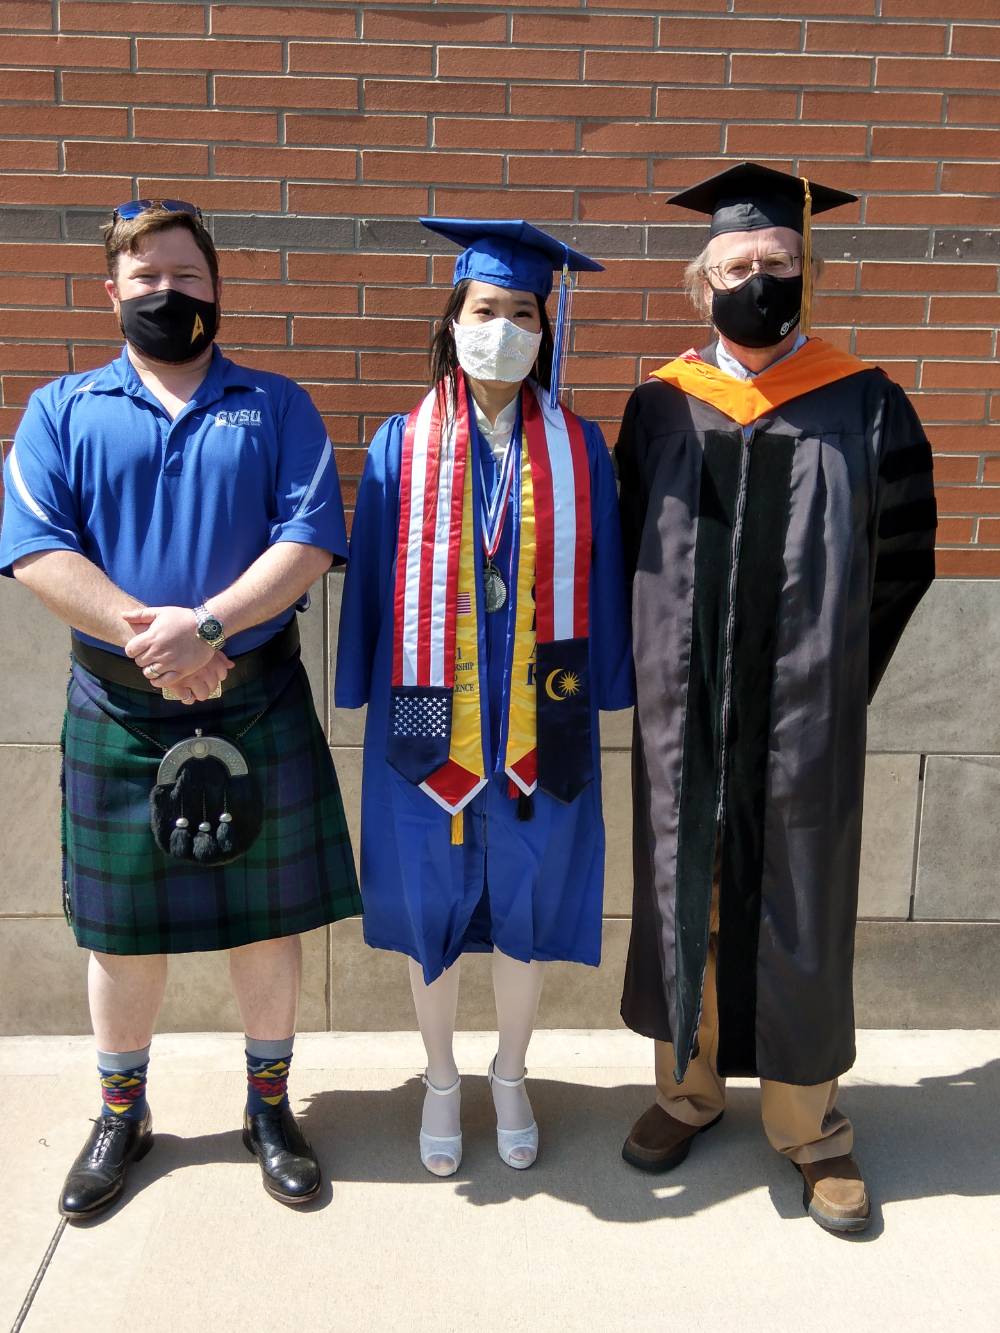 Dr. Baine and Dr. Dunne with an engineering graduate